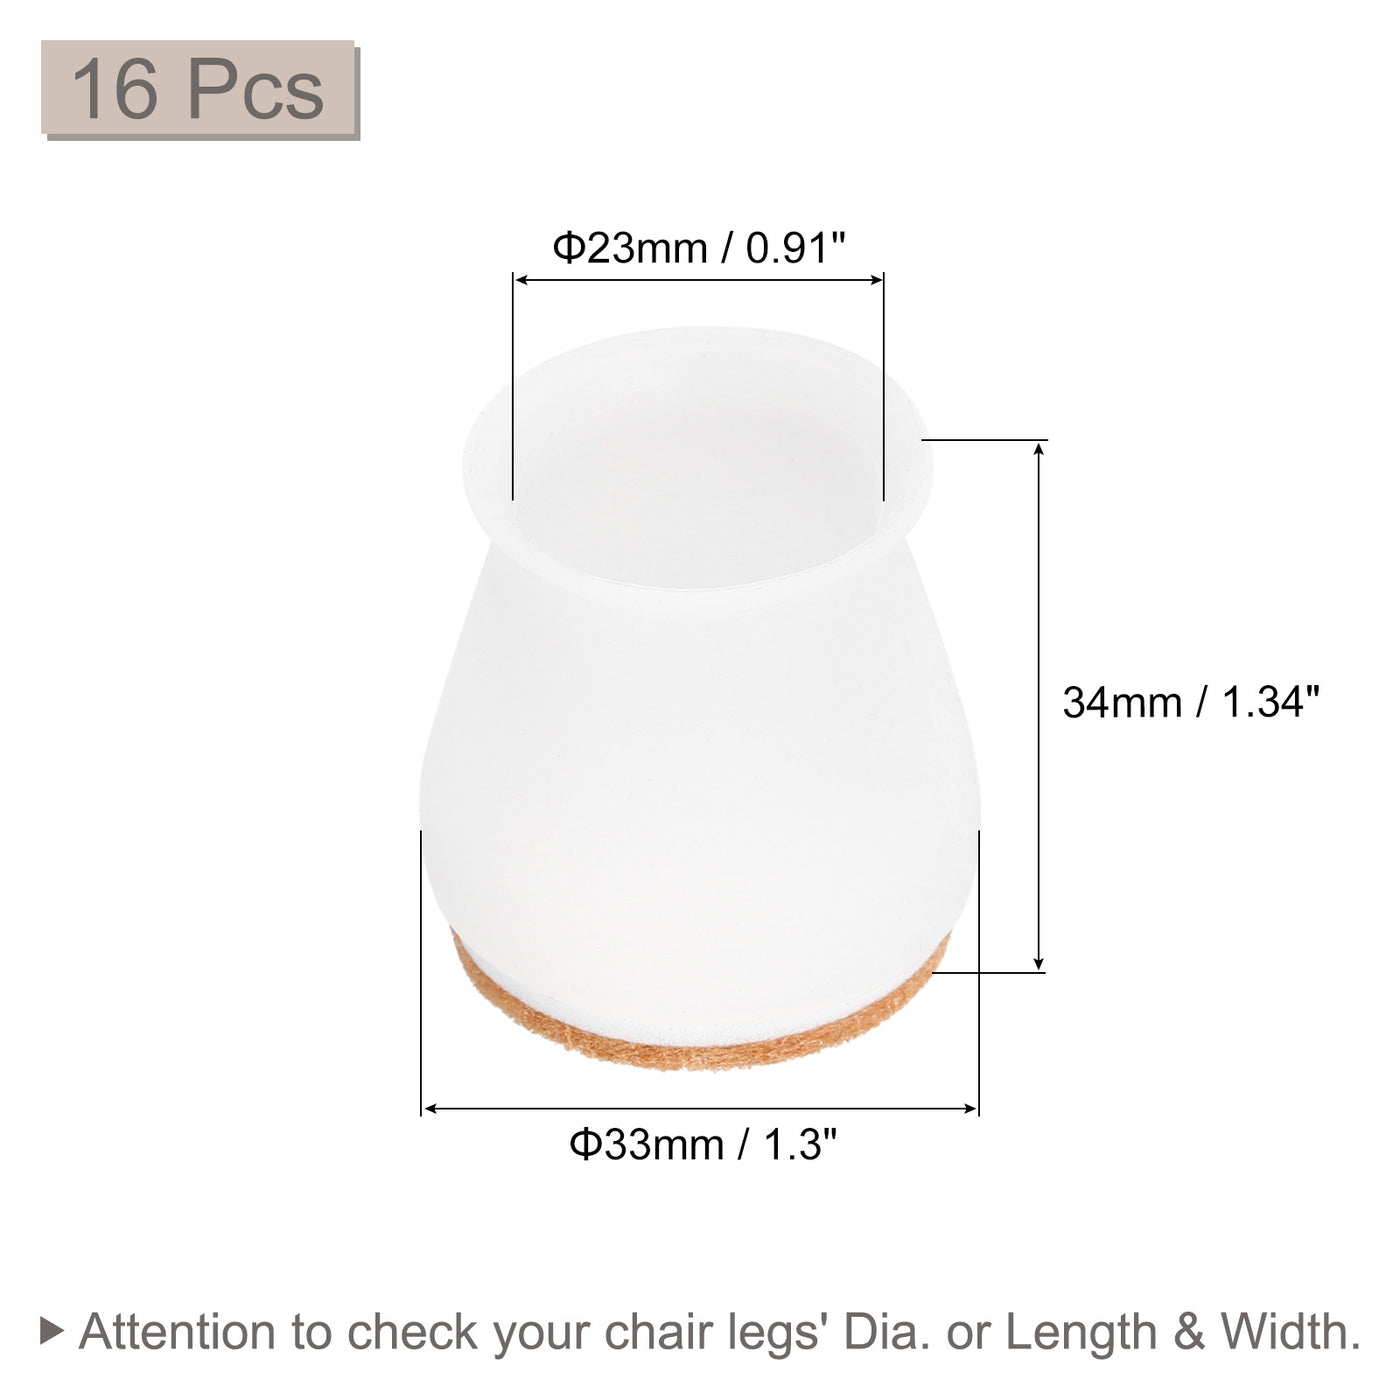 uxcell Uxcell Chair Leg Floor Protectors, 16Pcs 23mm(0.91") Silicone & Felt Chair Leg Cover Caps for Hardwood Floors (White)